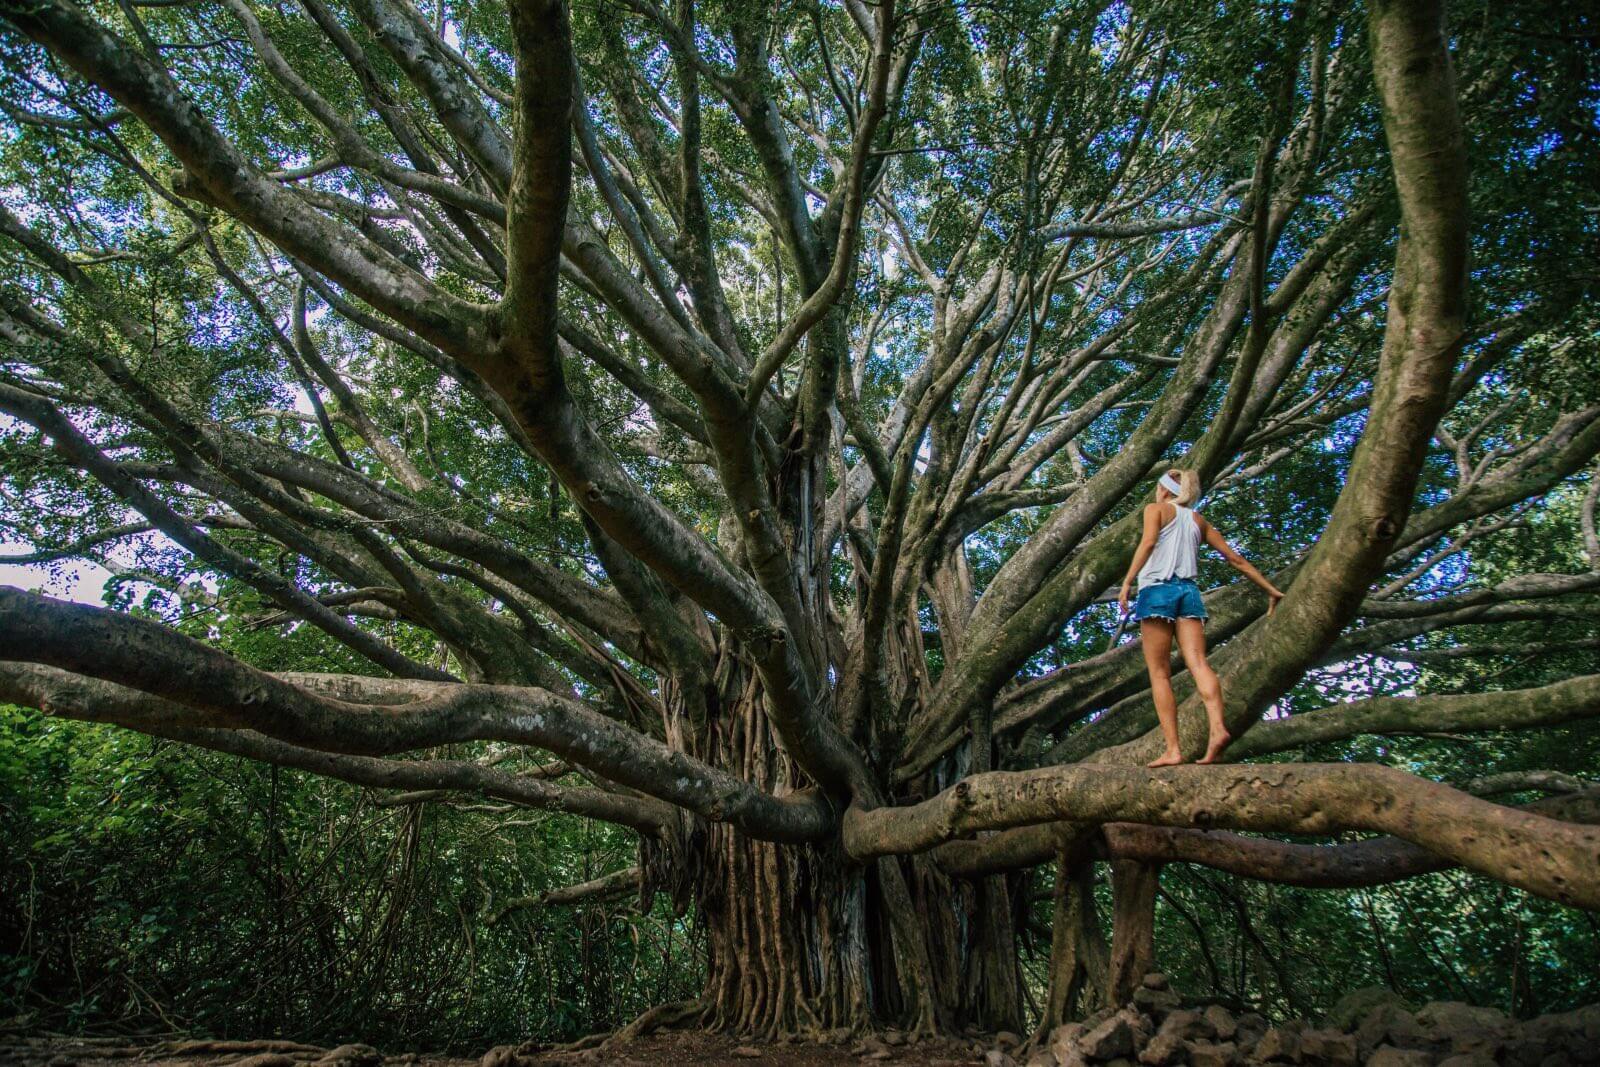 Banyan Tree on the Pipiwai Trail, one of the best hikes on Maui